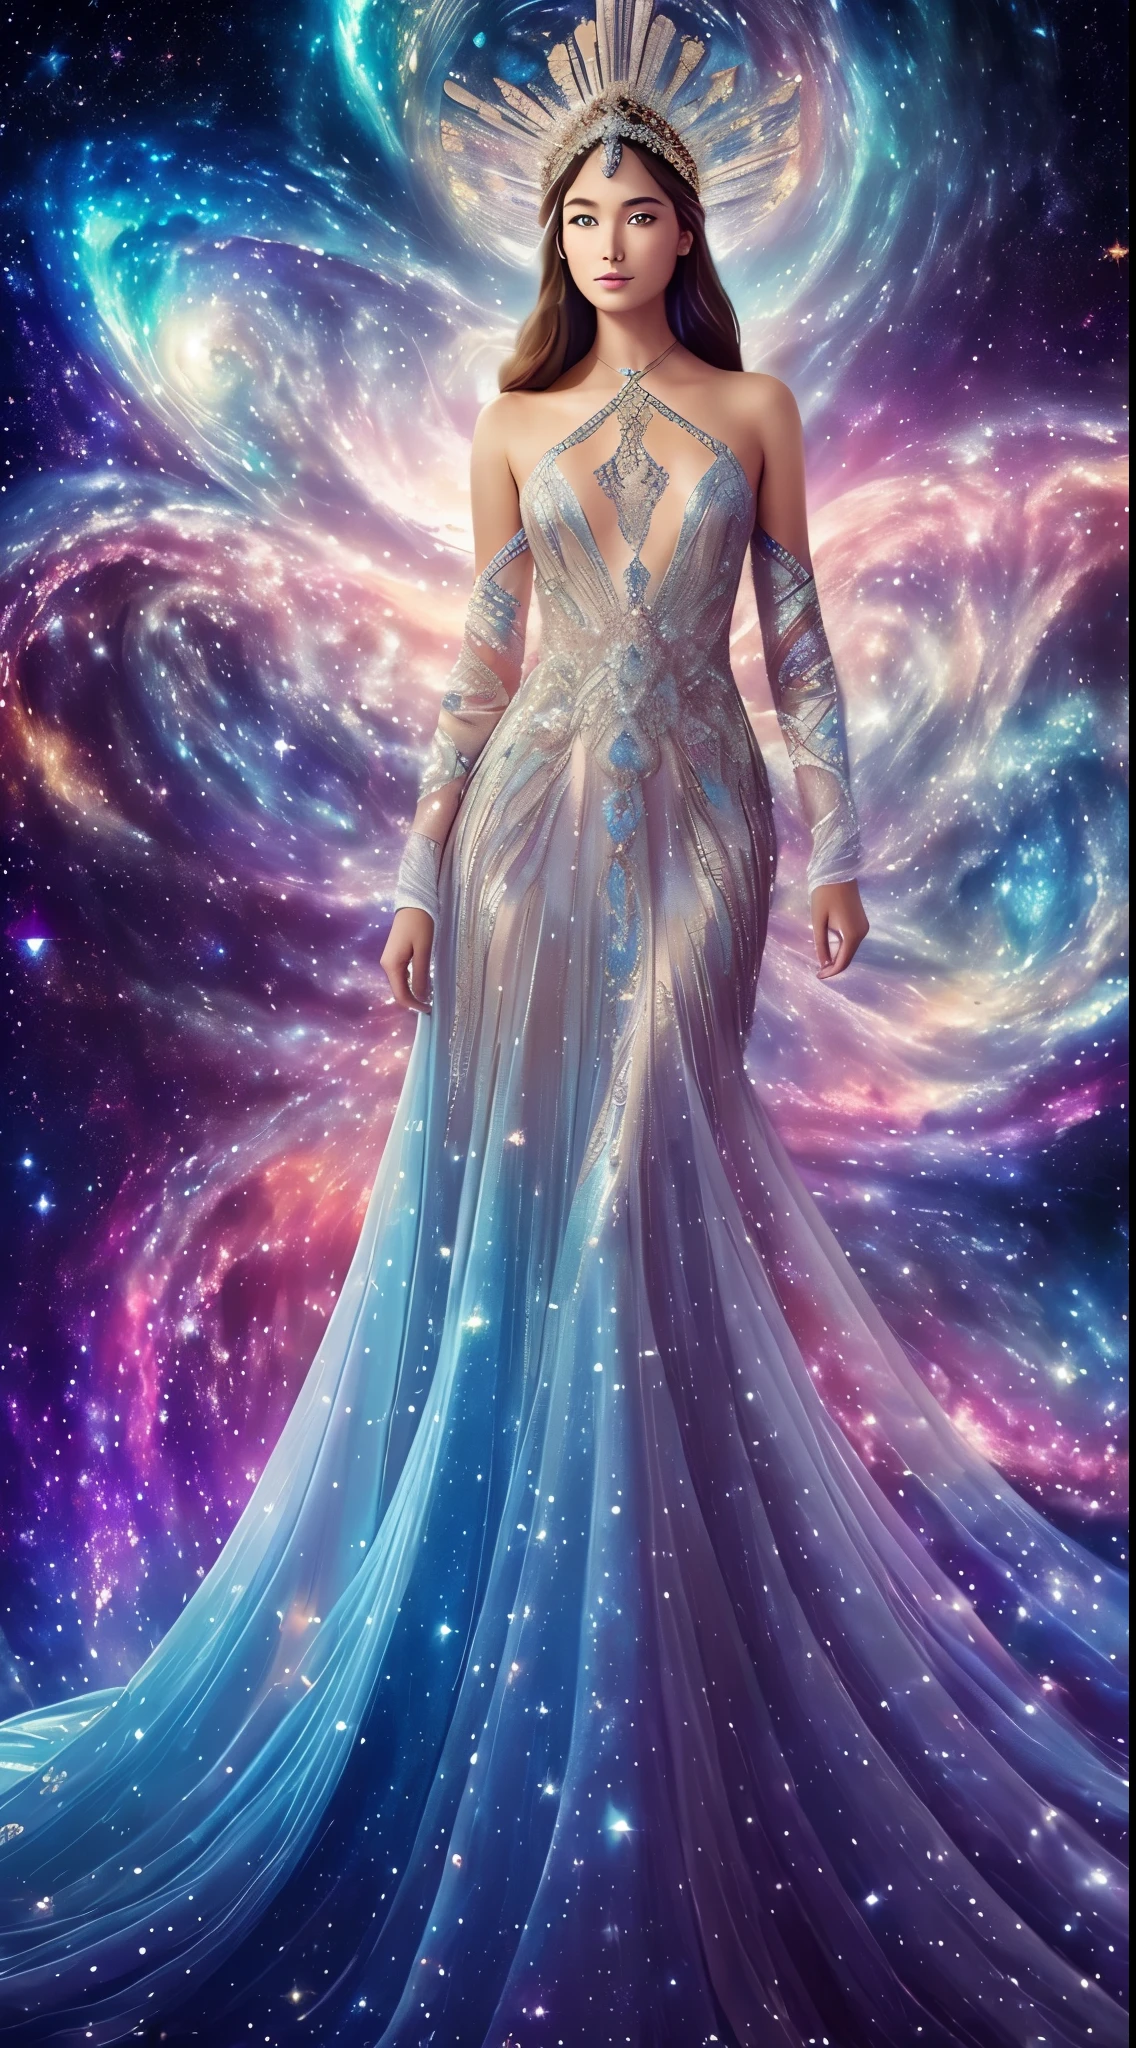 (masterpiece:1.3), perfect anatomy, 32k UHD resolution, professional photography, (realistic photo:1.3), cinematic angle, (best quality:1.3), (high quality:1.2), depht of field, beautiful woman, (Celestial Elegance Ensemble:1.2), (Galactic-inspired Fabric Patterns:1.1), (Starlight Sequin Embellishments:1.2), (Extravagant Moonlit Train:1.1), (Celestial Halo Headpiece:1.2), (Ethereal Glow Fabric:1.1), (Abstract Constellation Embroidery:1.1), (Luxurious Nebula Palette:1.2), (Stellar Runway Pose:1.1), (Cosmic Atmosphere:1.2), Korean fantasy